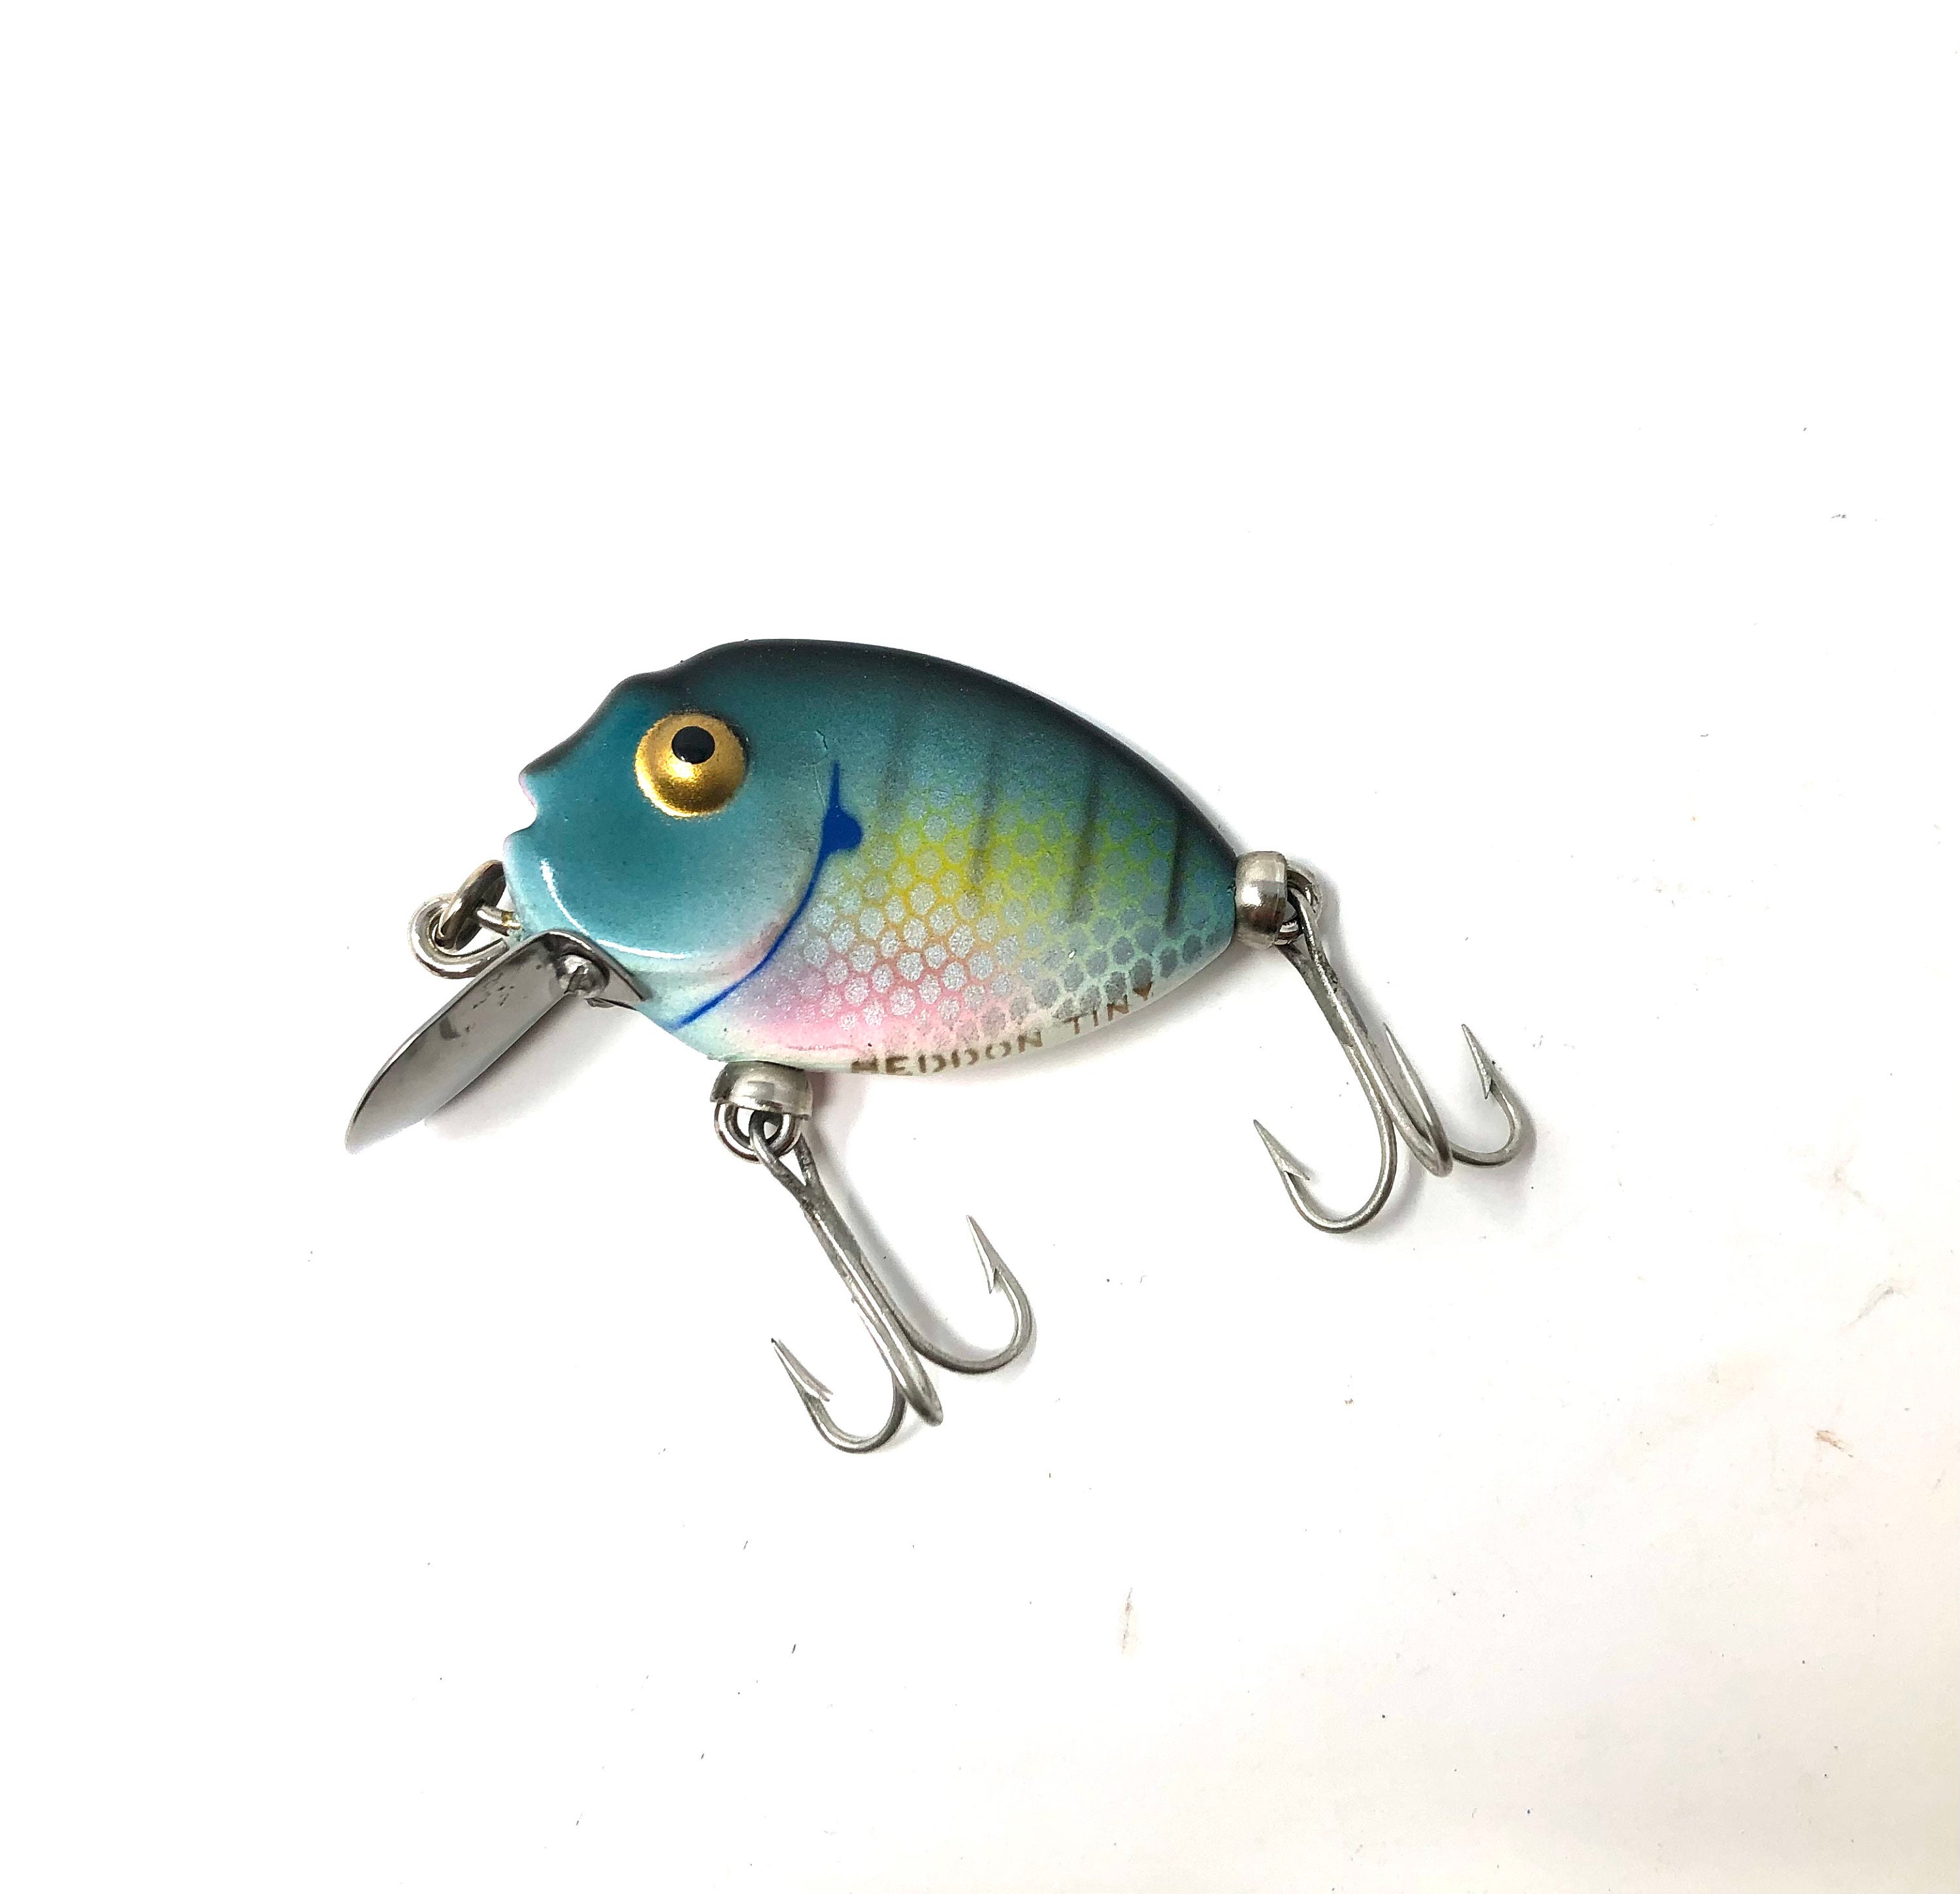 Vintage Heddon Tiny Punkinseed Blue Gill Fishing Lure / Antique